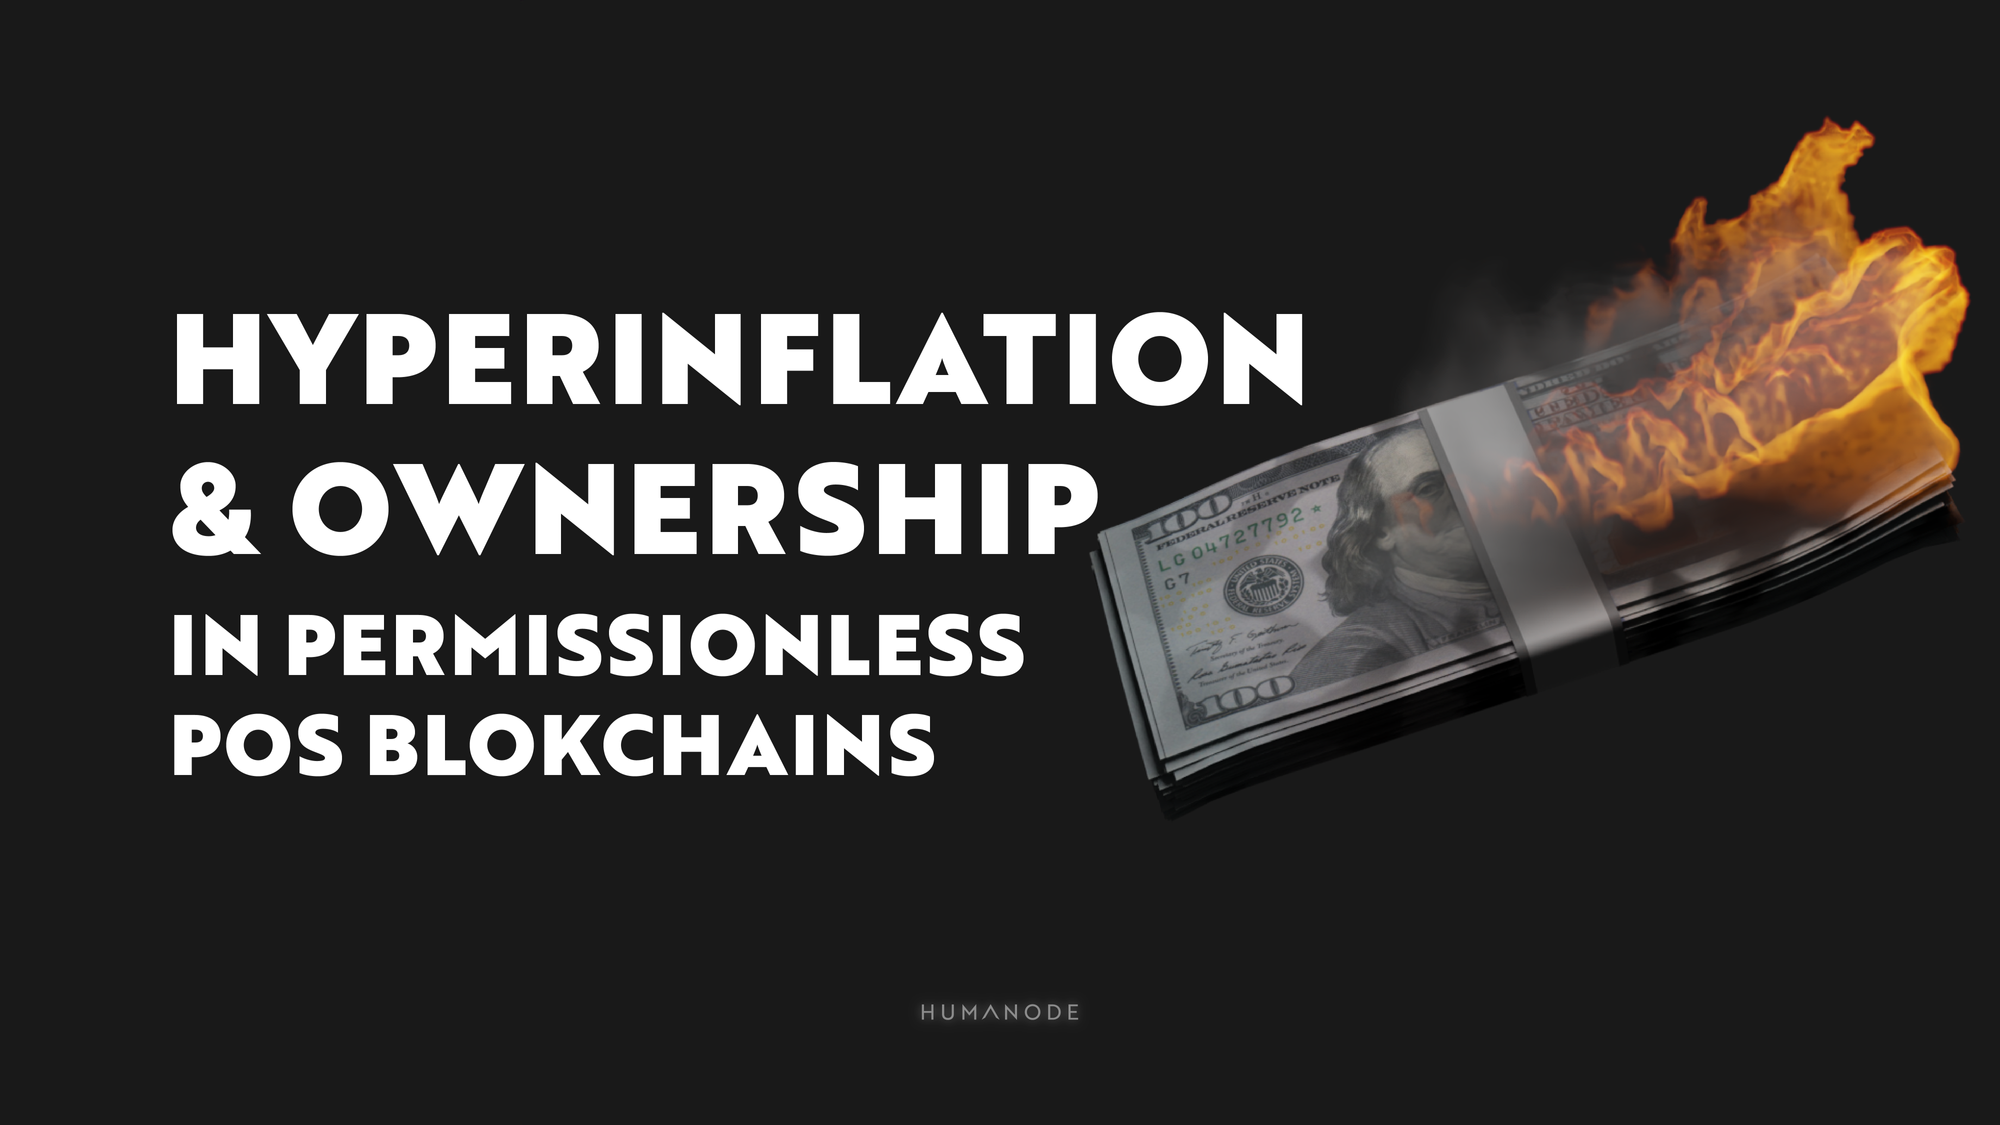 The effects of hyperinflation on ownership in permissionless Proof of Stake blockchains